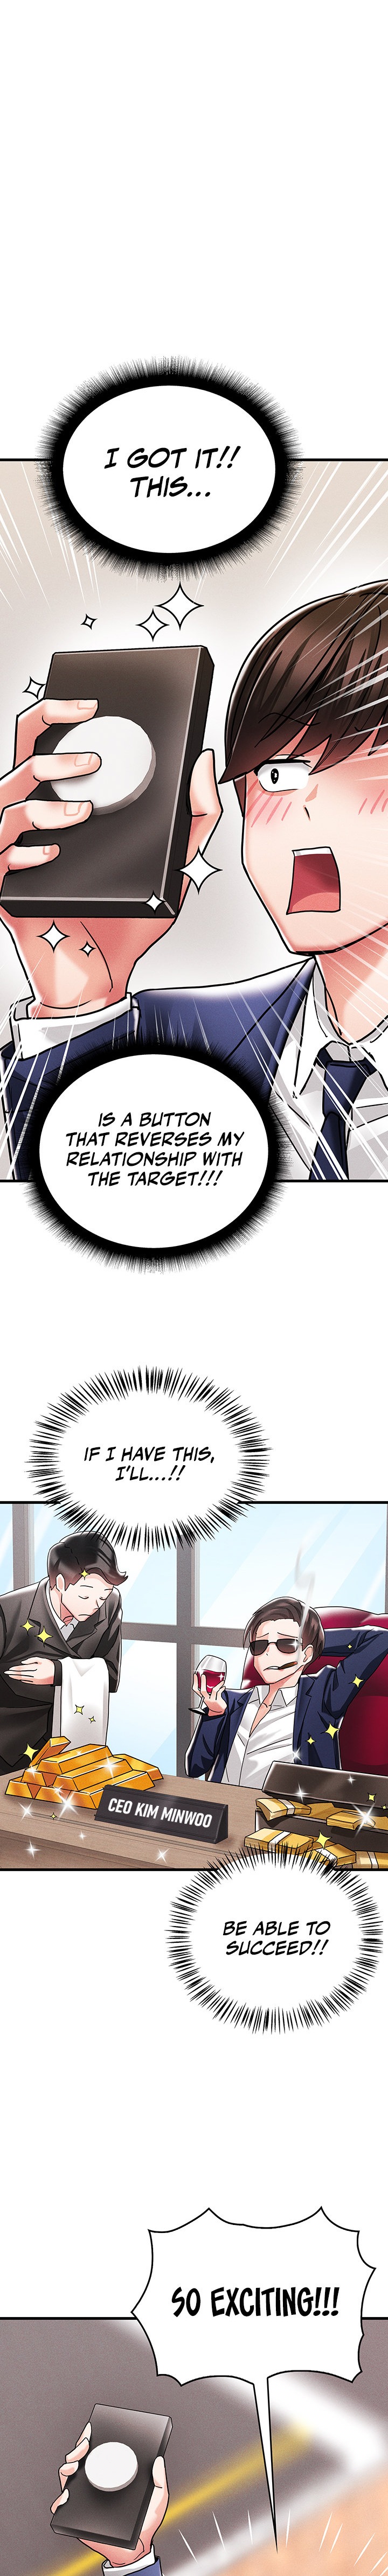 Relationship Reverse Button: Let’s Make Her Submissive - Chapter 3 Page 14